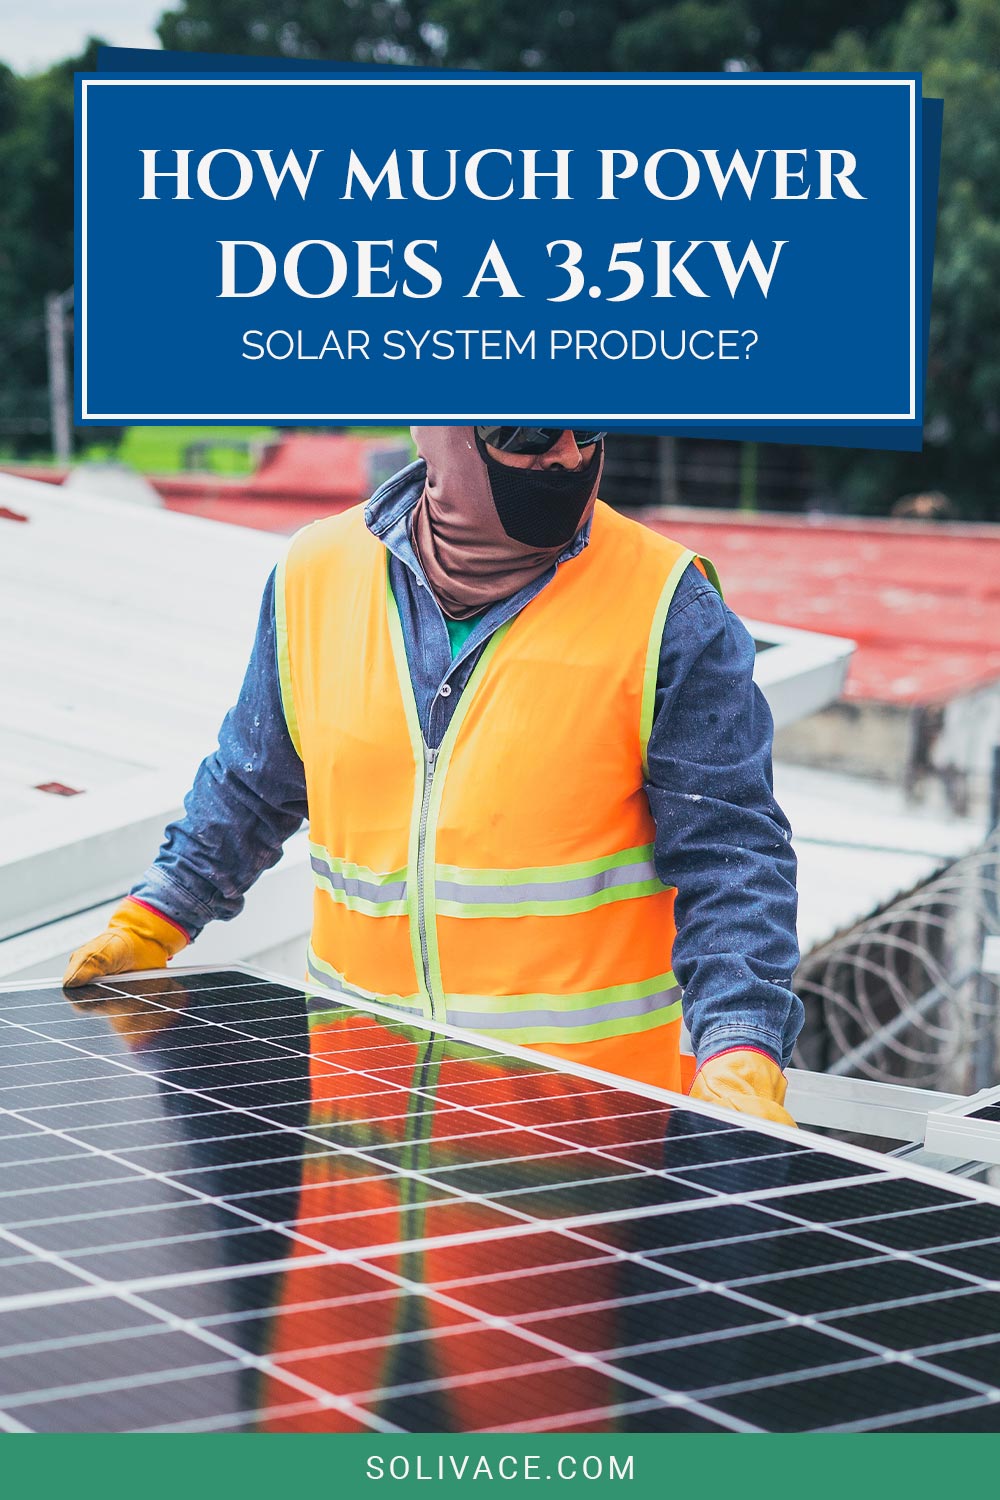 Man in safety working jacket handling a solar panel - How Much Power Does a 3.5kw Solar System Produce?